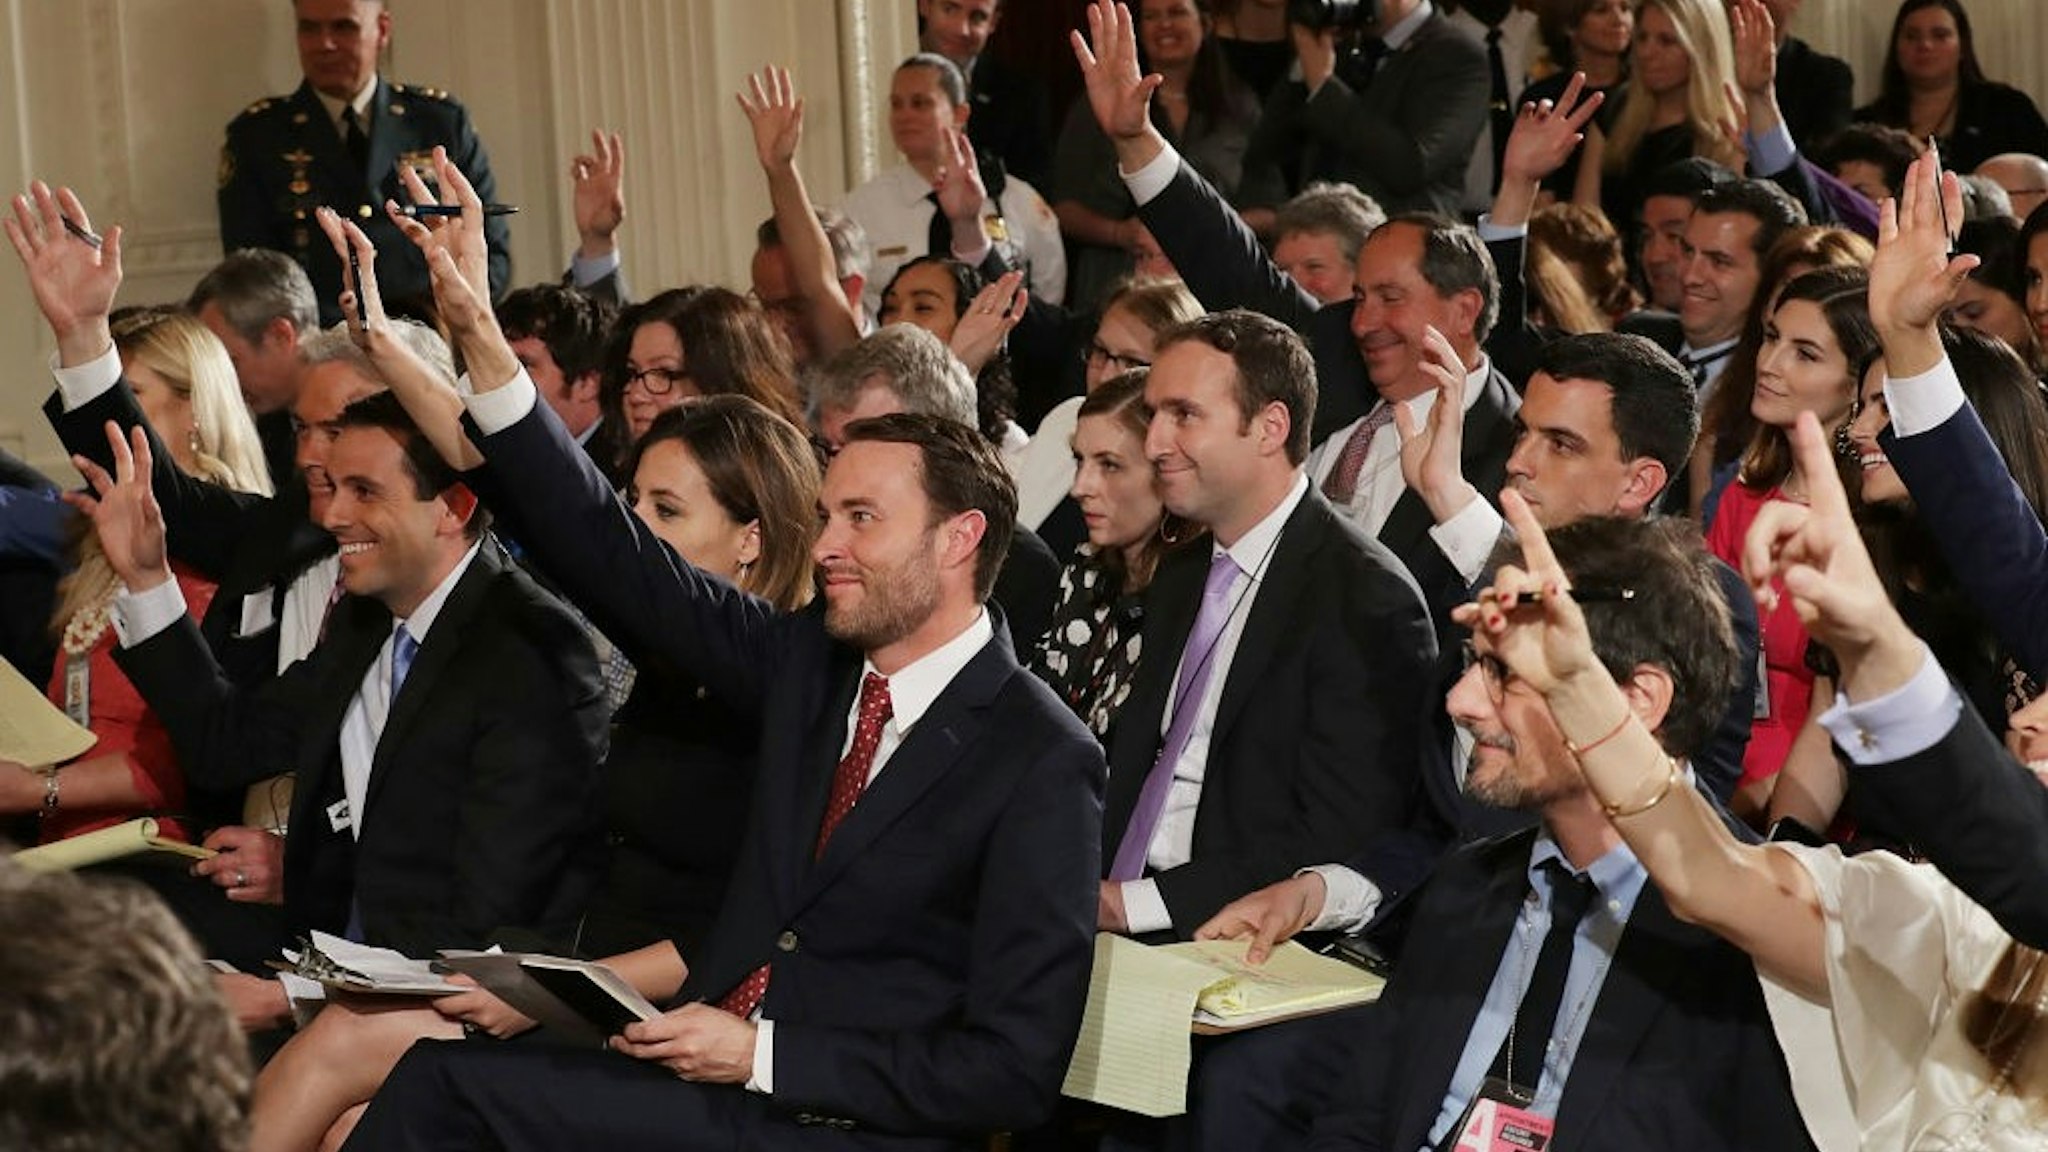 WASHINGTON, DC - MAY 18: Reporters raise their hands to ask questions during a news conference with Colombian President Juan Manuel Santos and U.S. President Donald Trump in the East Room of the White House May 18, 2017 in Washington, DC. The Trump administration has said it wants to slash foreign aide and Santos will most likely seek a renewal of $450 million dollars from the U.S. that supports the peace accord between the Columbian government at the Revolutionary Armed Forces (FARC). (Photo by